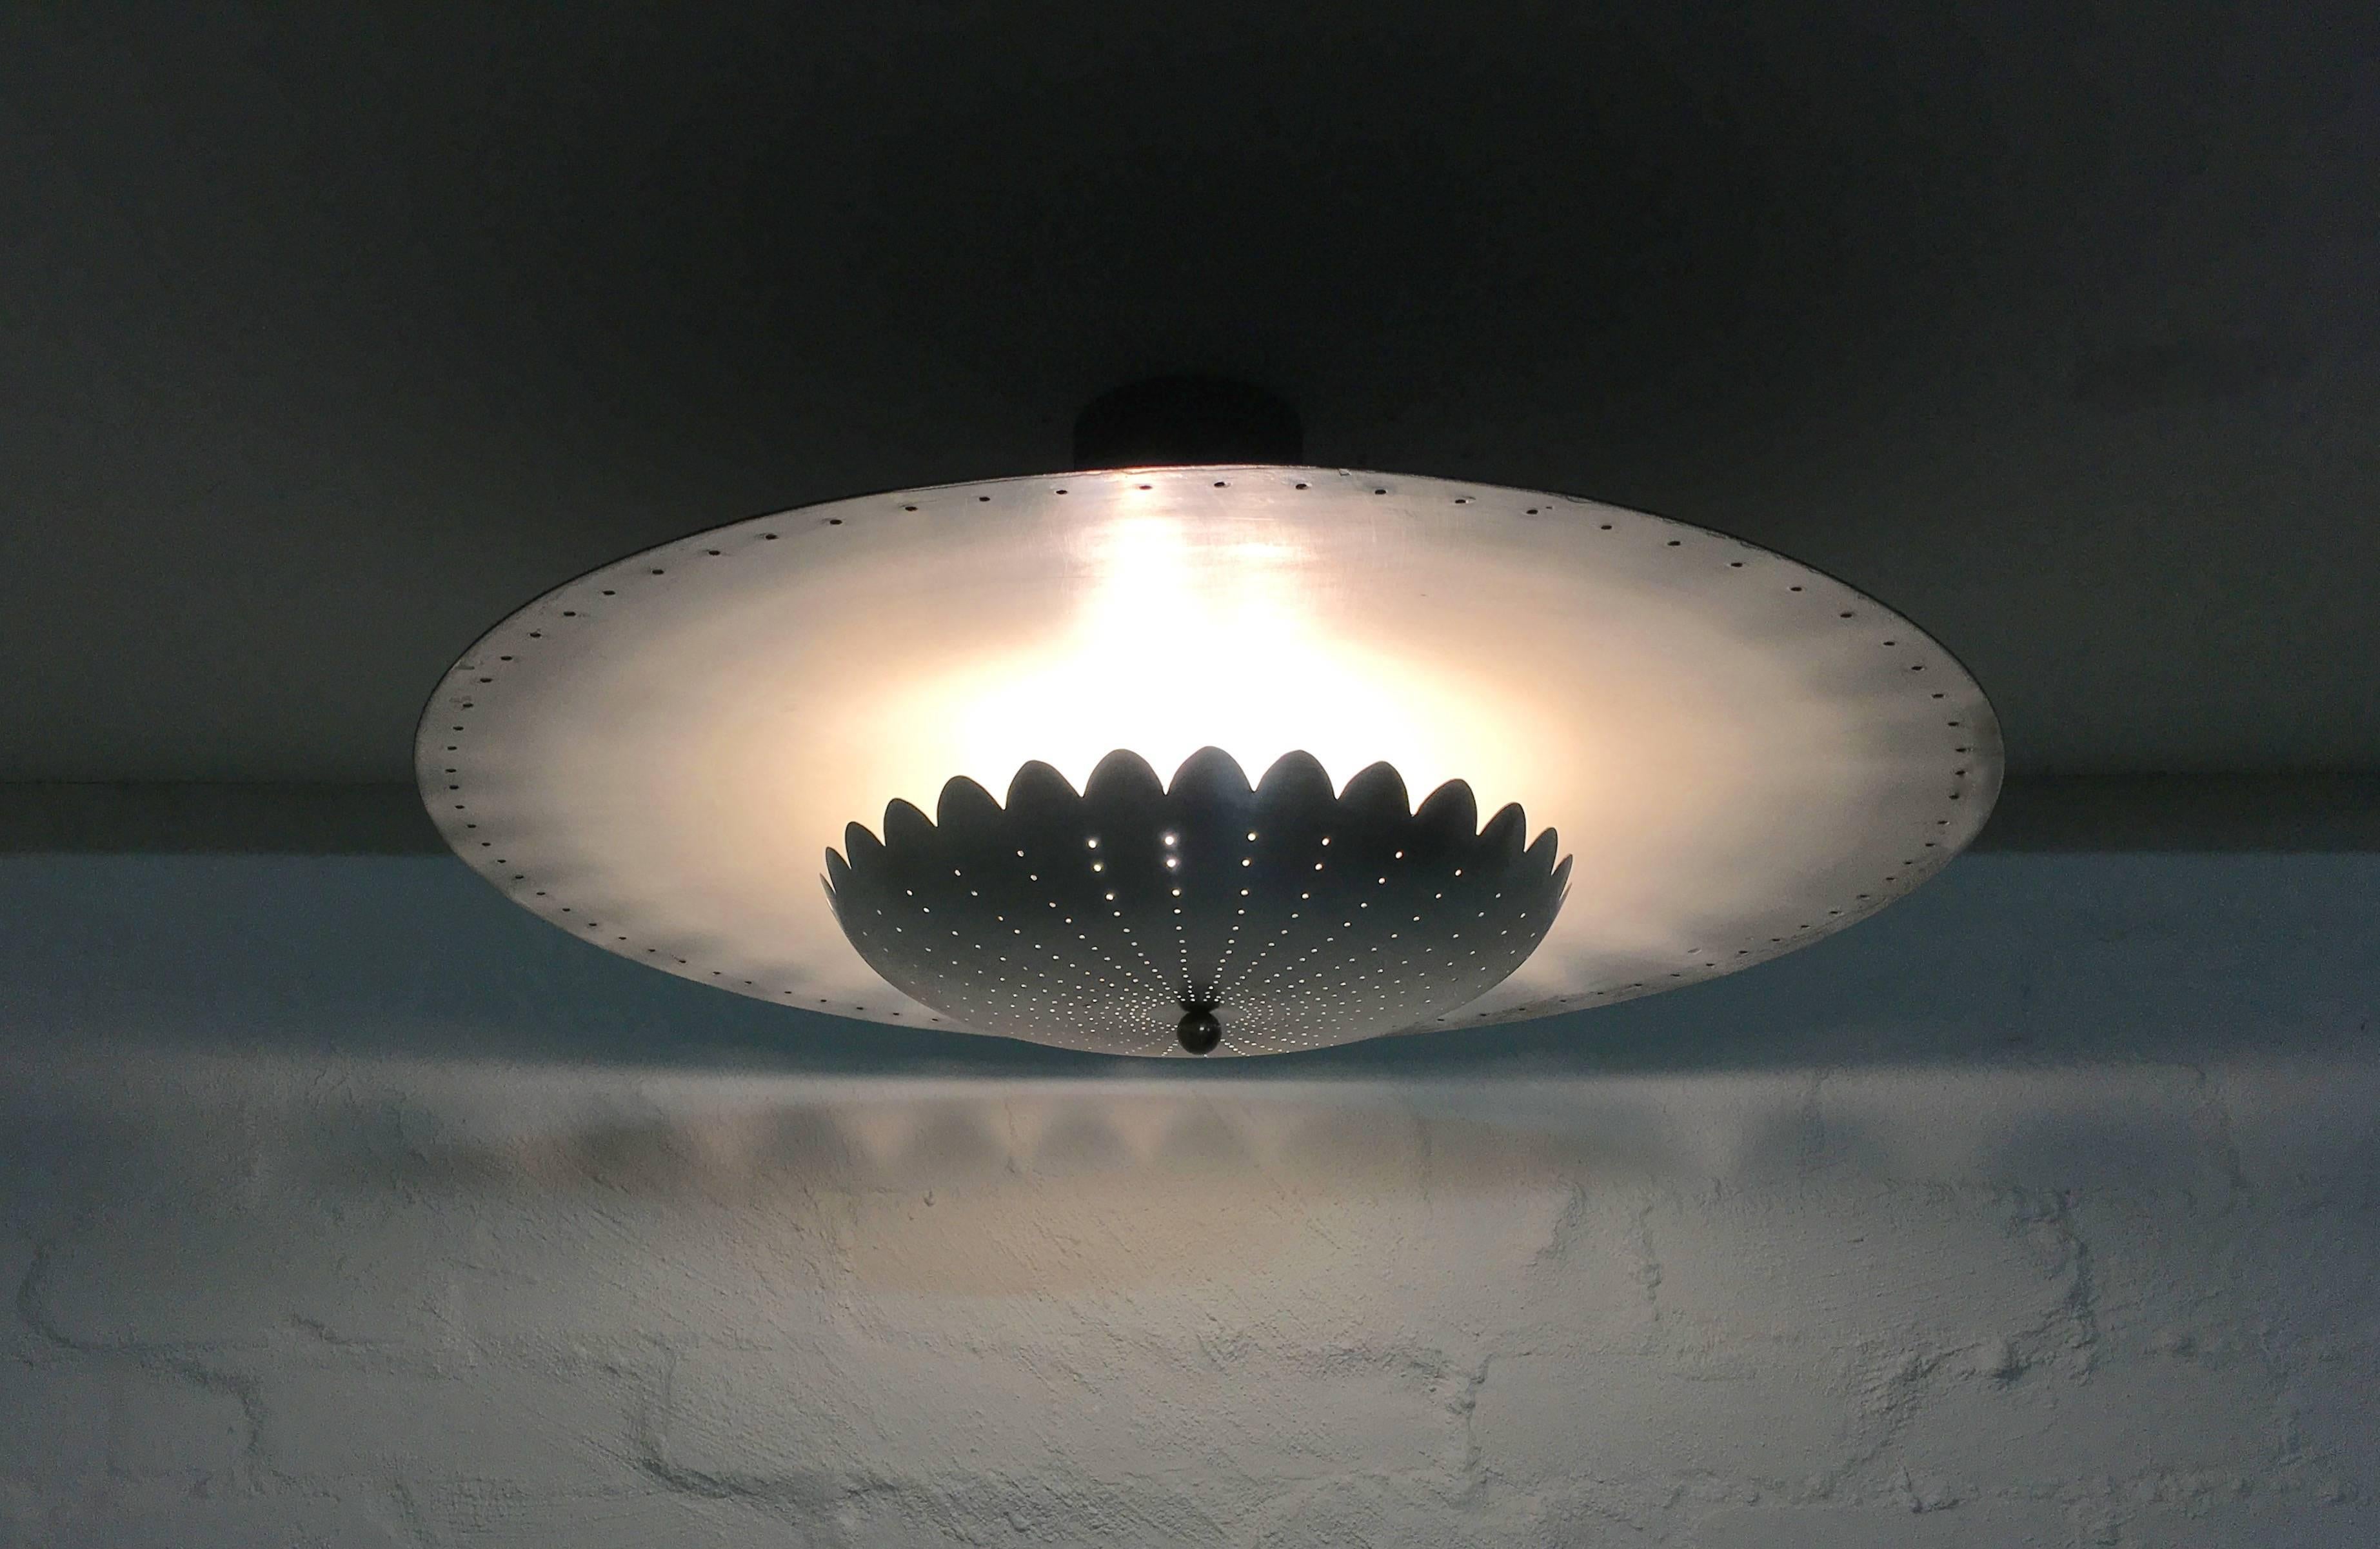 Aluminum Brown Evans and Co. 'BECO' Ceiling Mounted Reflector, Melbourne, 1950s